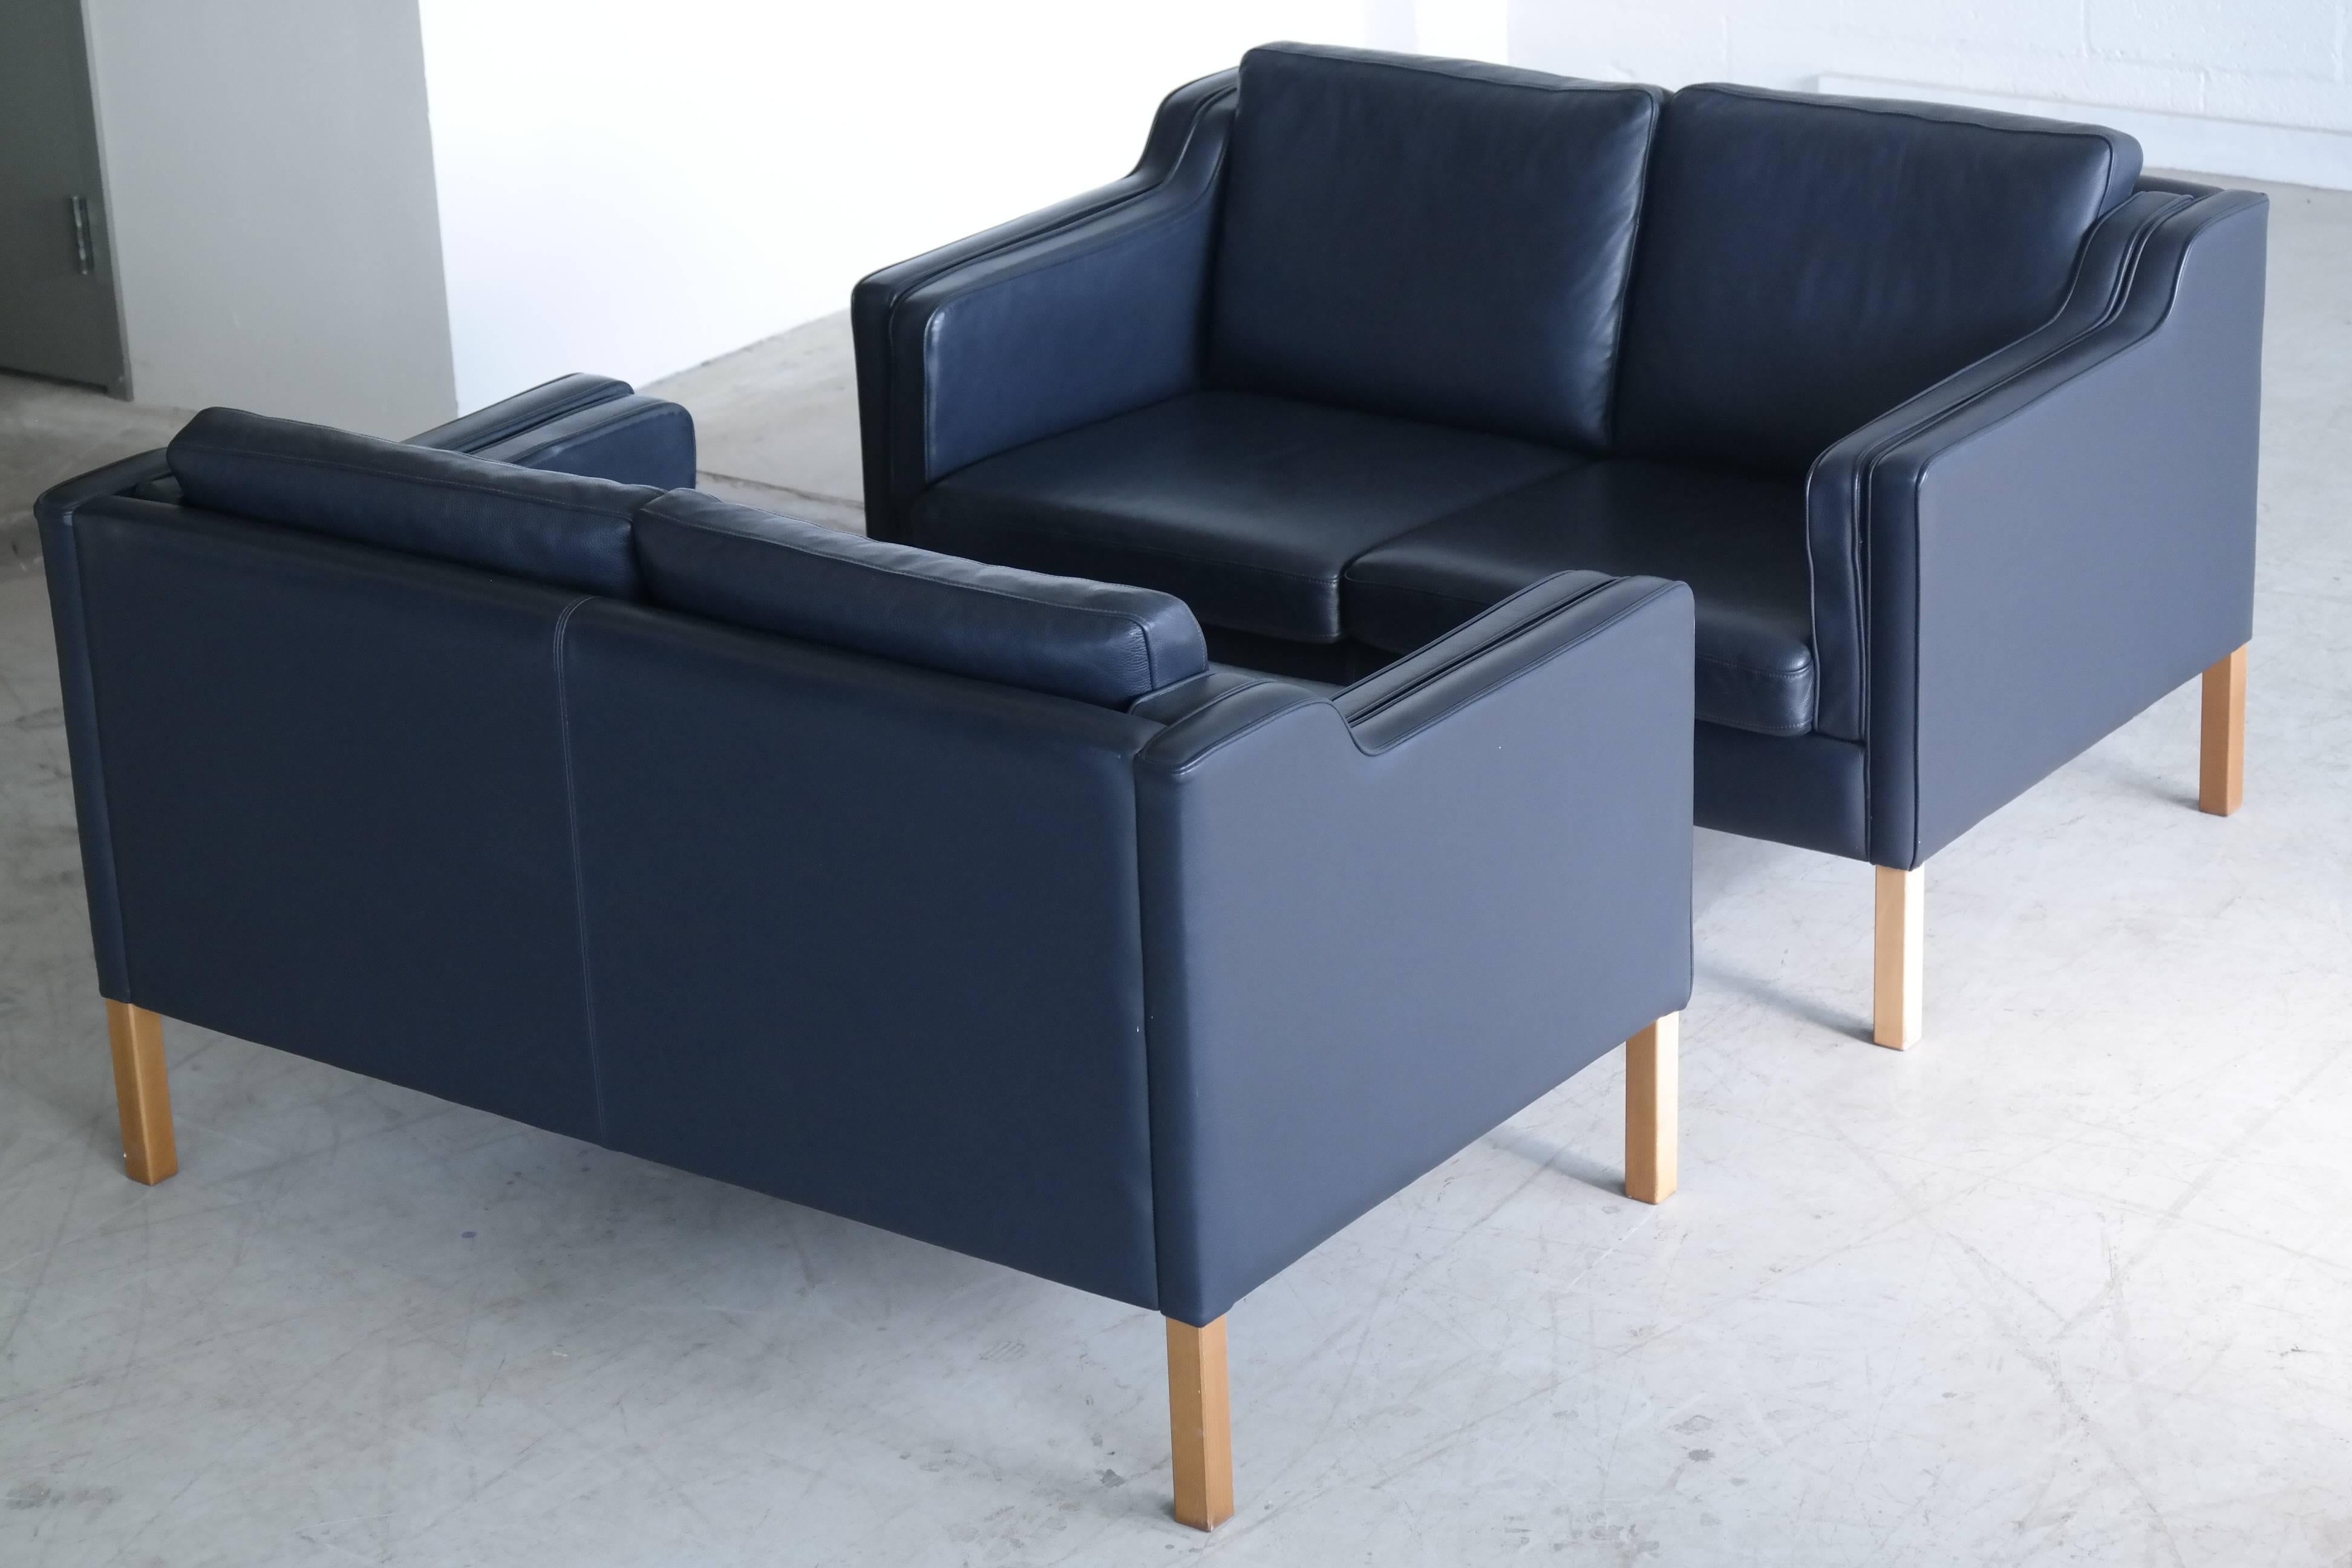 Very elegant and comfortable classic pair of Borge Mogensen style sofas model 2212 in dark sapphire navy blue leather by Stouby Polsterfabrik of Denmark. High quality leather over a beech wood frame and legs. Nicely worn in cushions are top filled